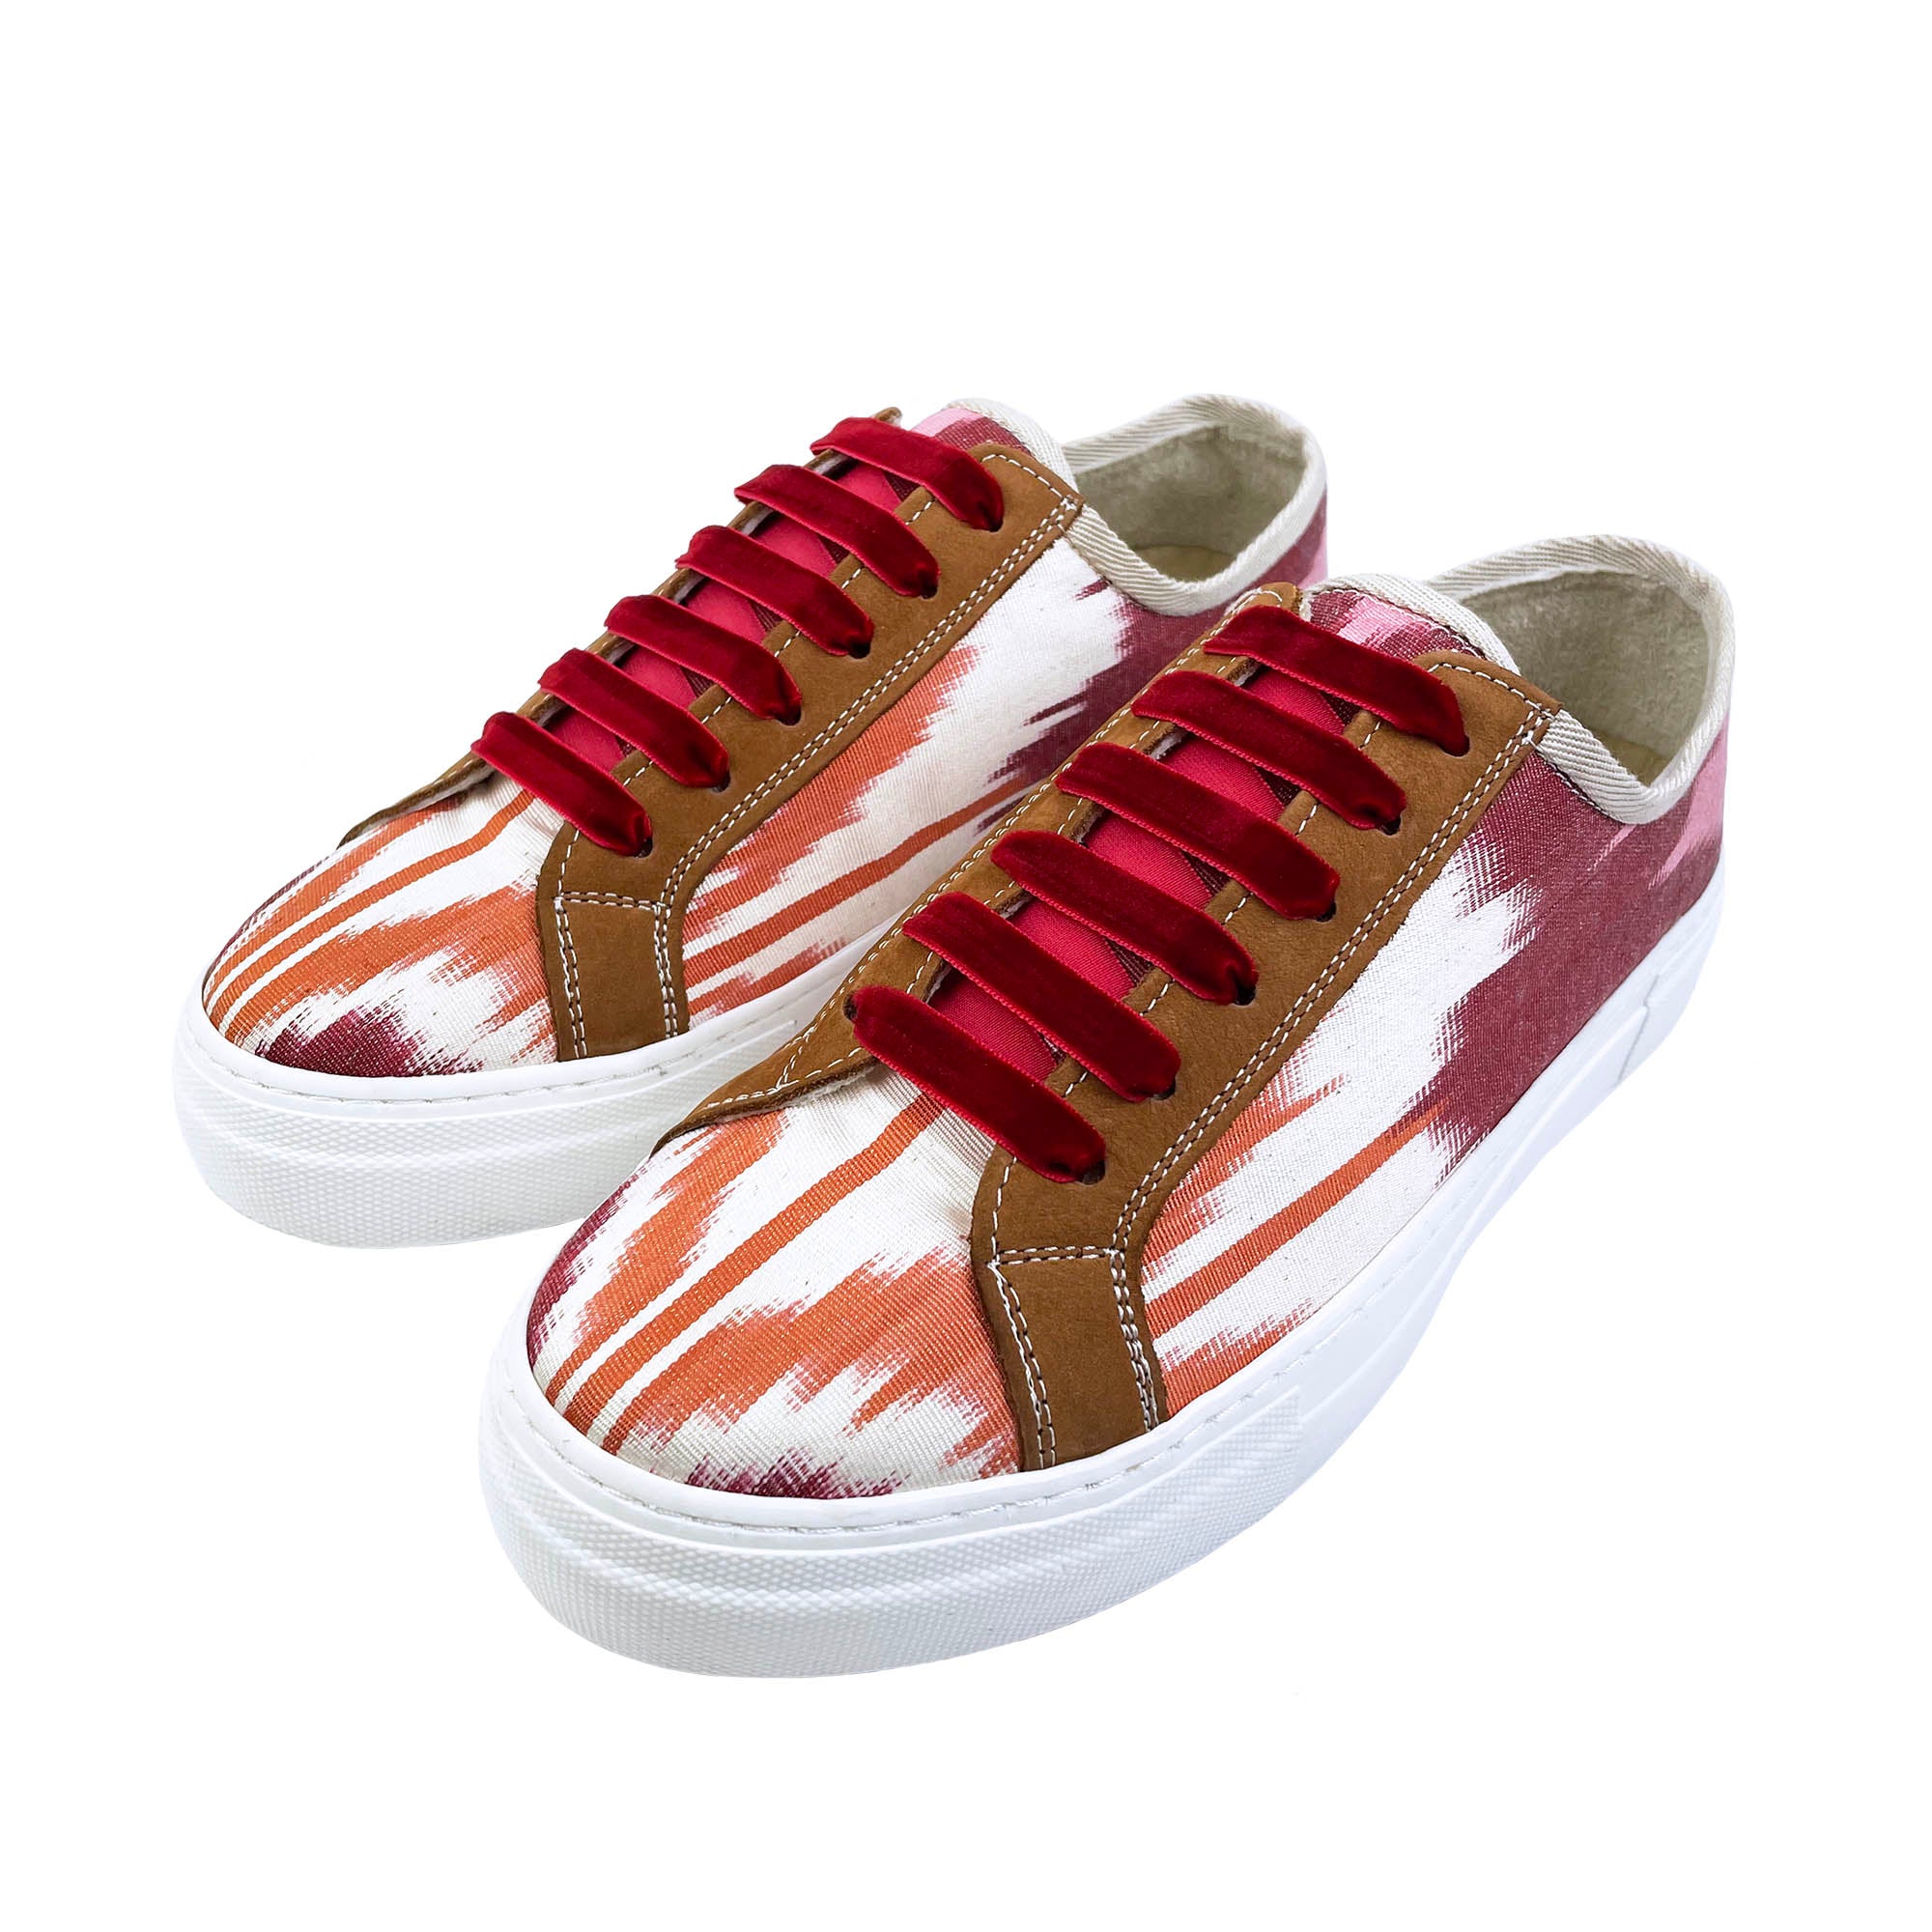 Red and Orange Ikat Silk Sneakers with tan leather and red velvet laces